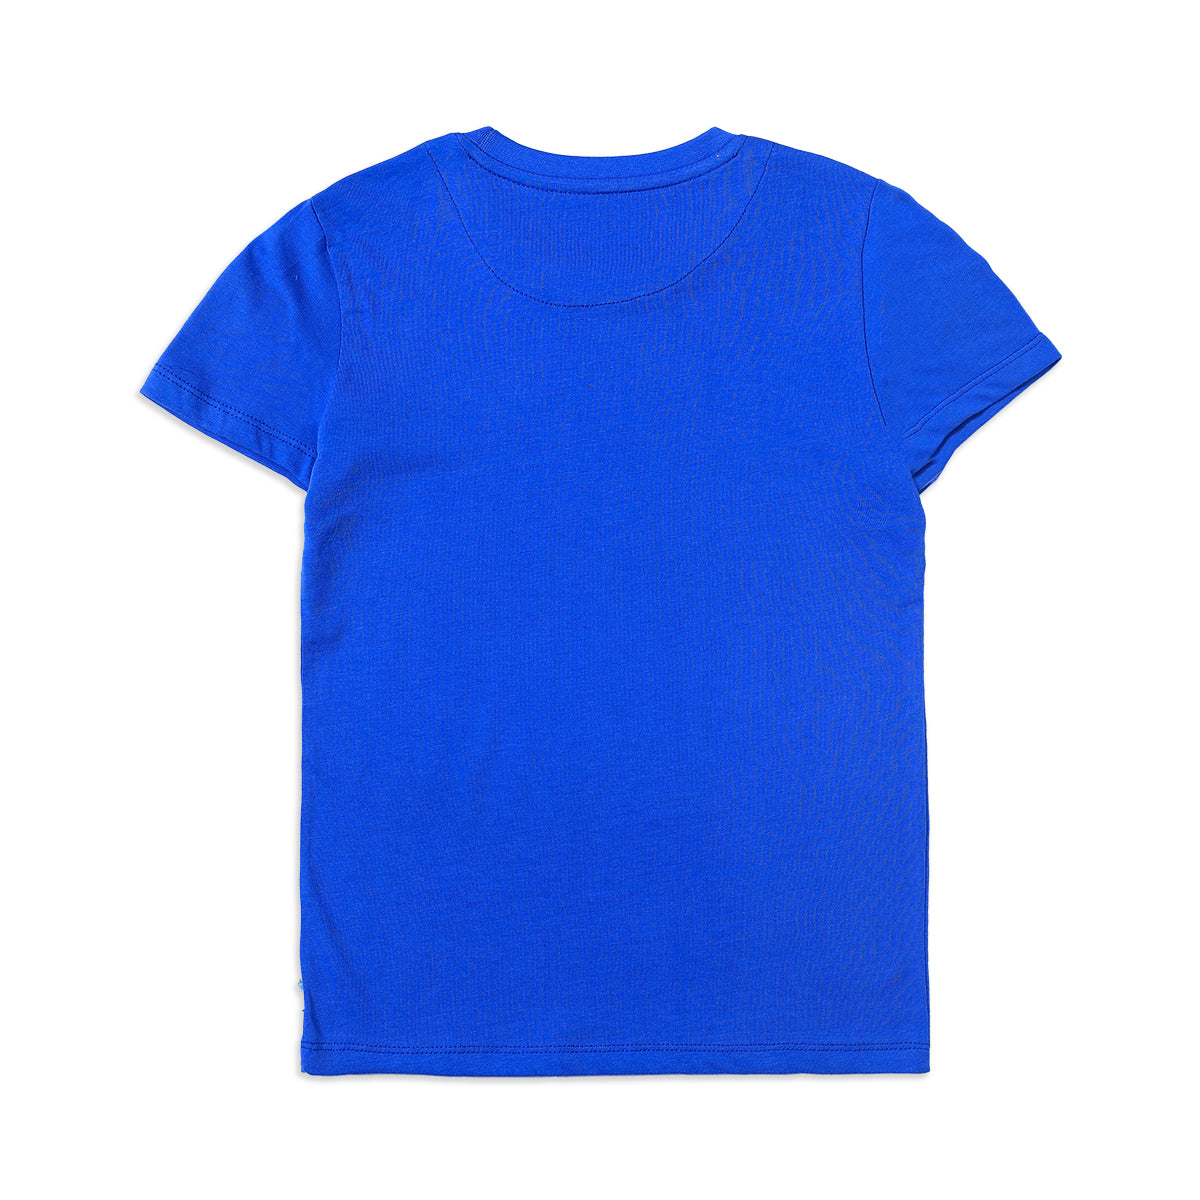 Blue Graphic Tee